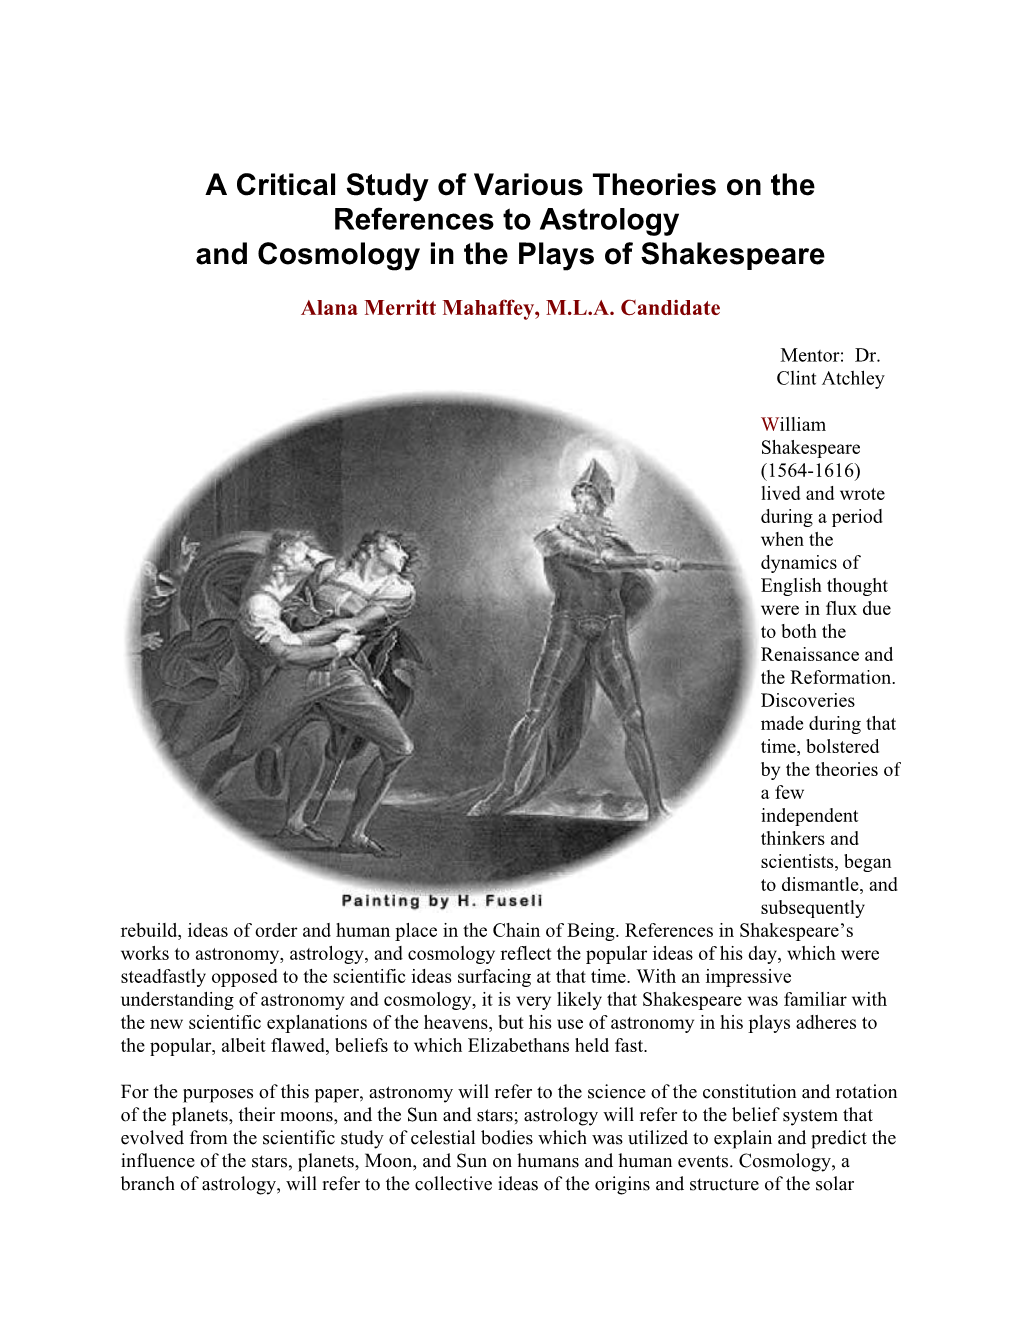 A Critical Study of Various Theories on the References to Astrology and Cosmology in the Plays of Shakespeare